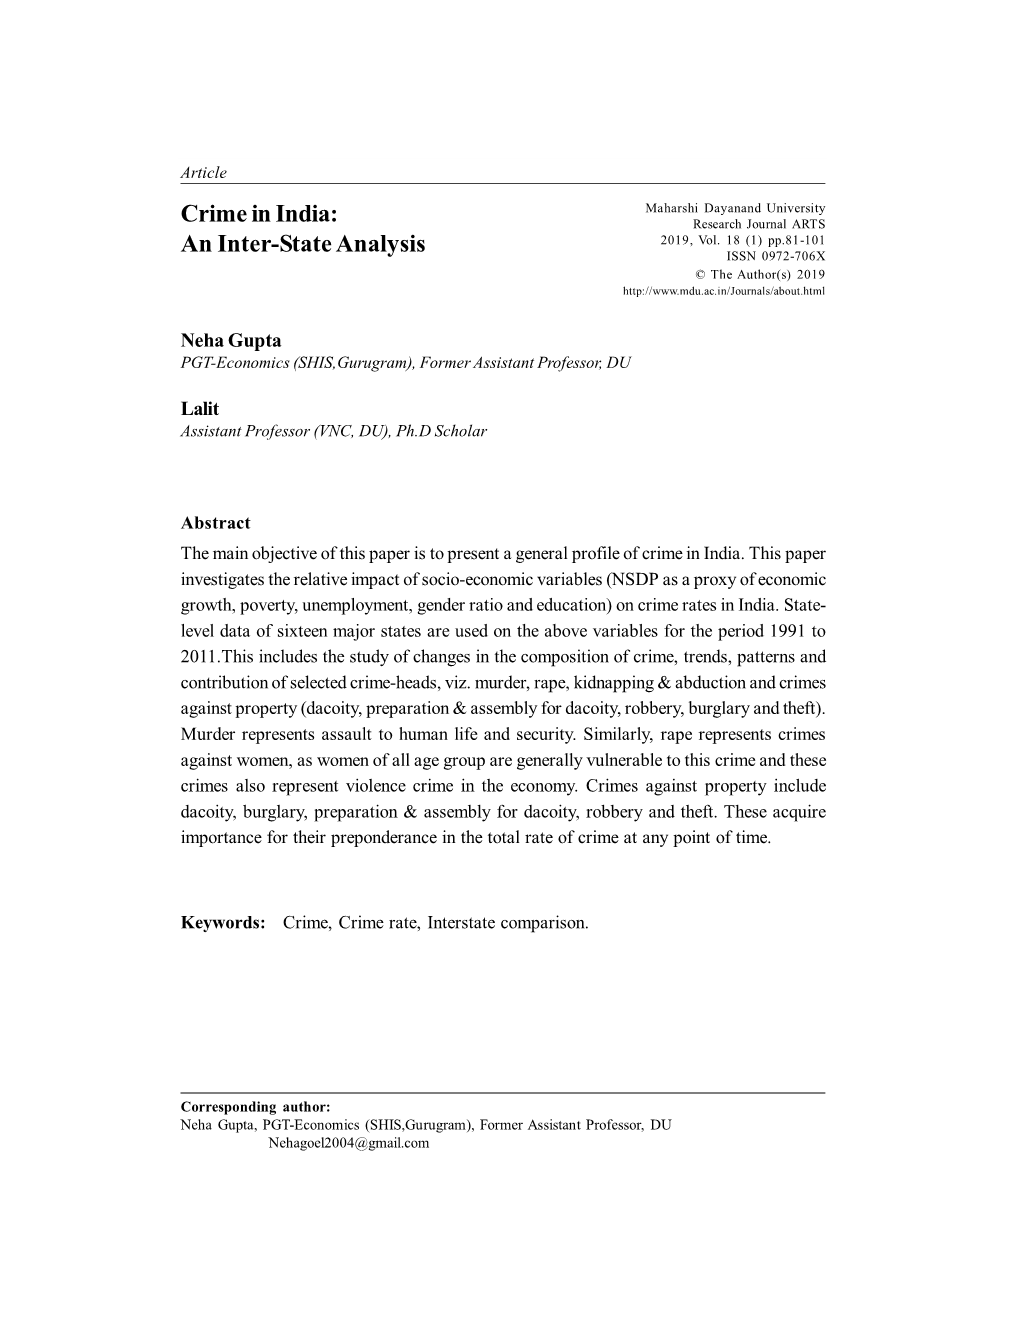 Crime in India: Research Journal ARTS 2019, Vol